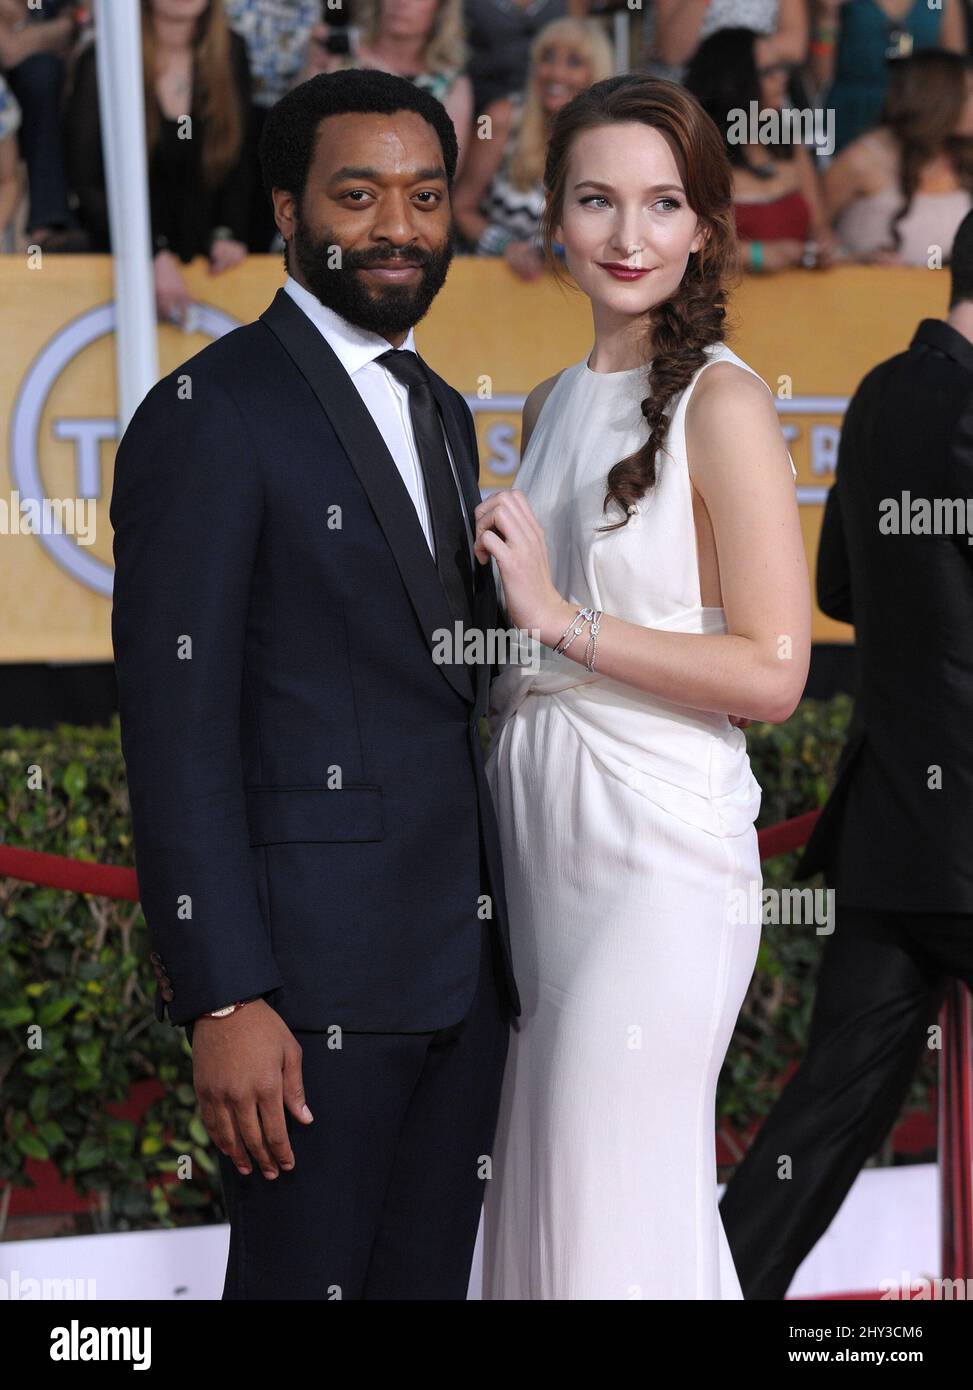 Chiwetel Ejiofor attends the 20th Annual SAG Awards at Shrine Auditorium, Los Angeles, California 18th January. Stock Photo